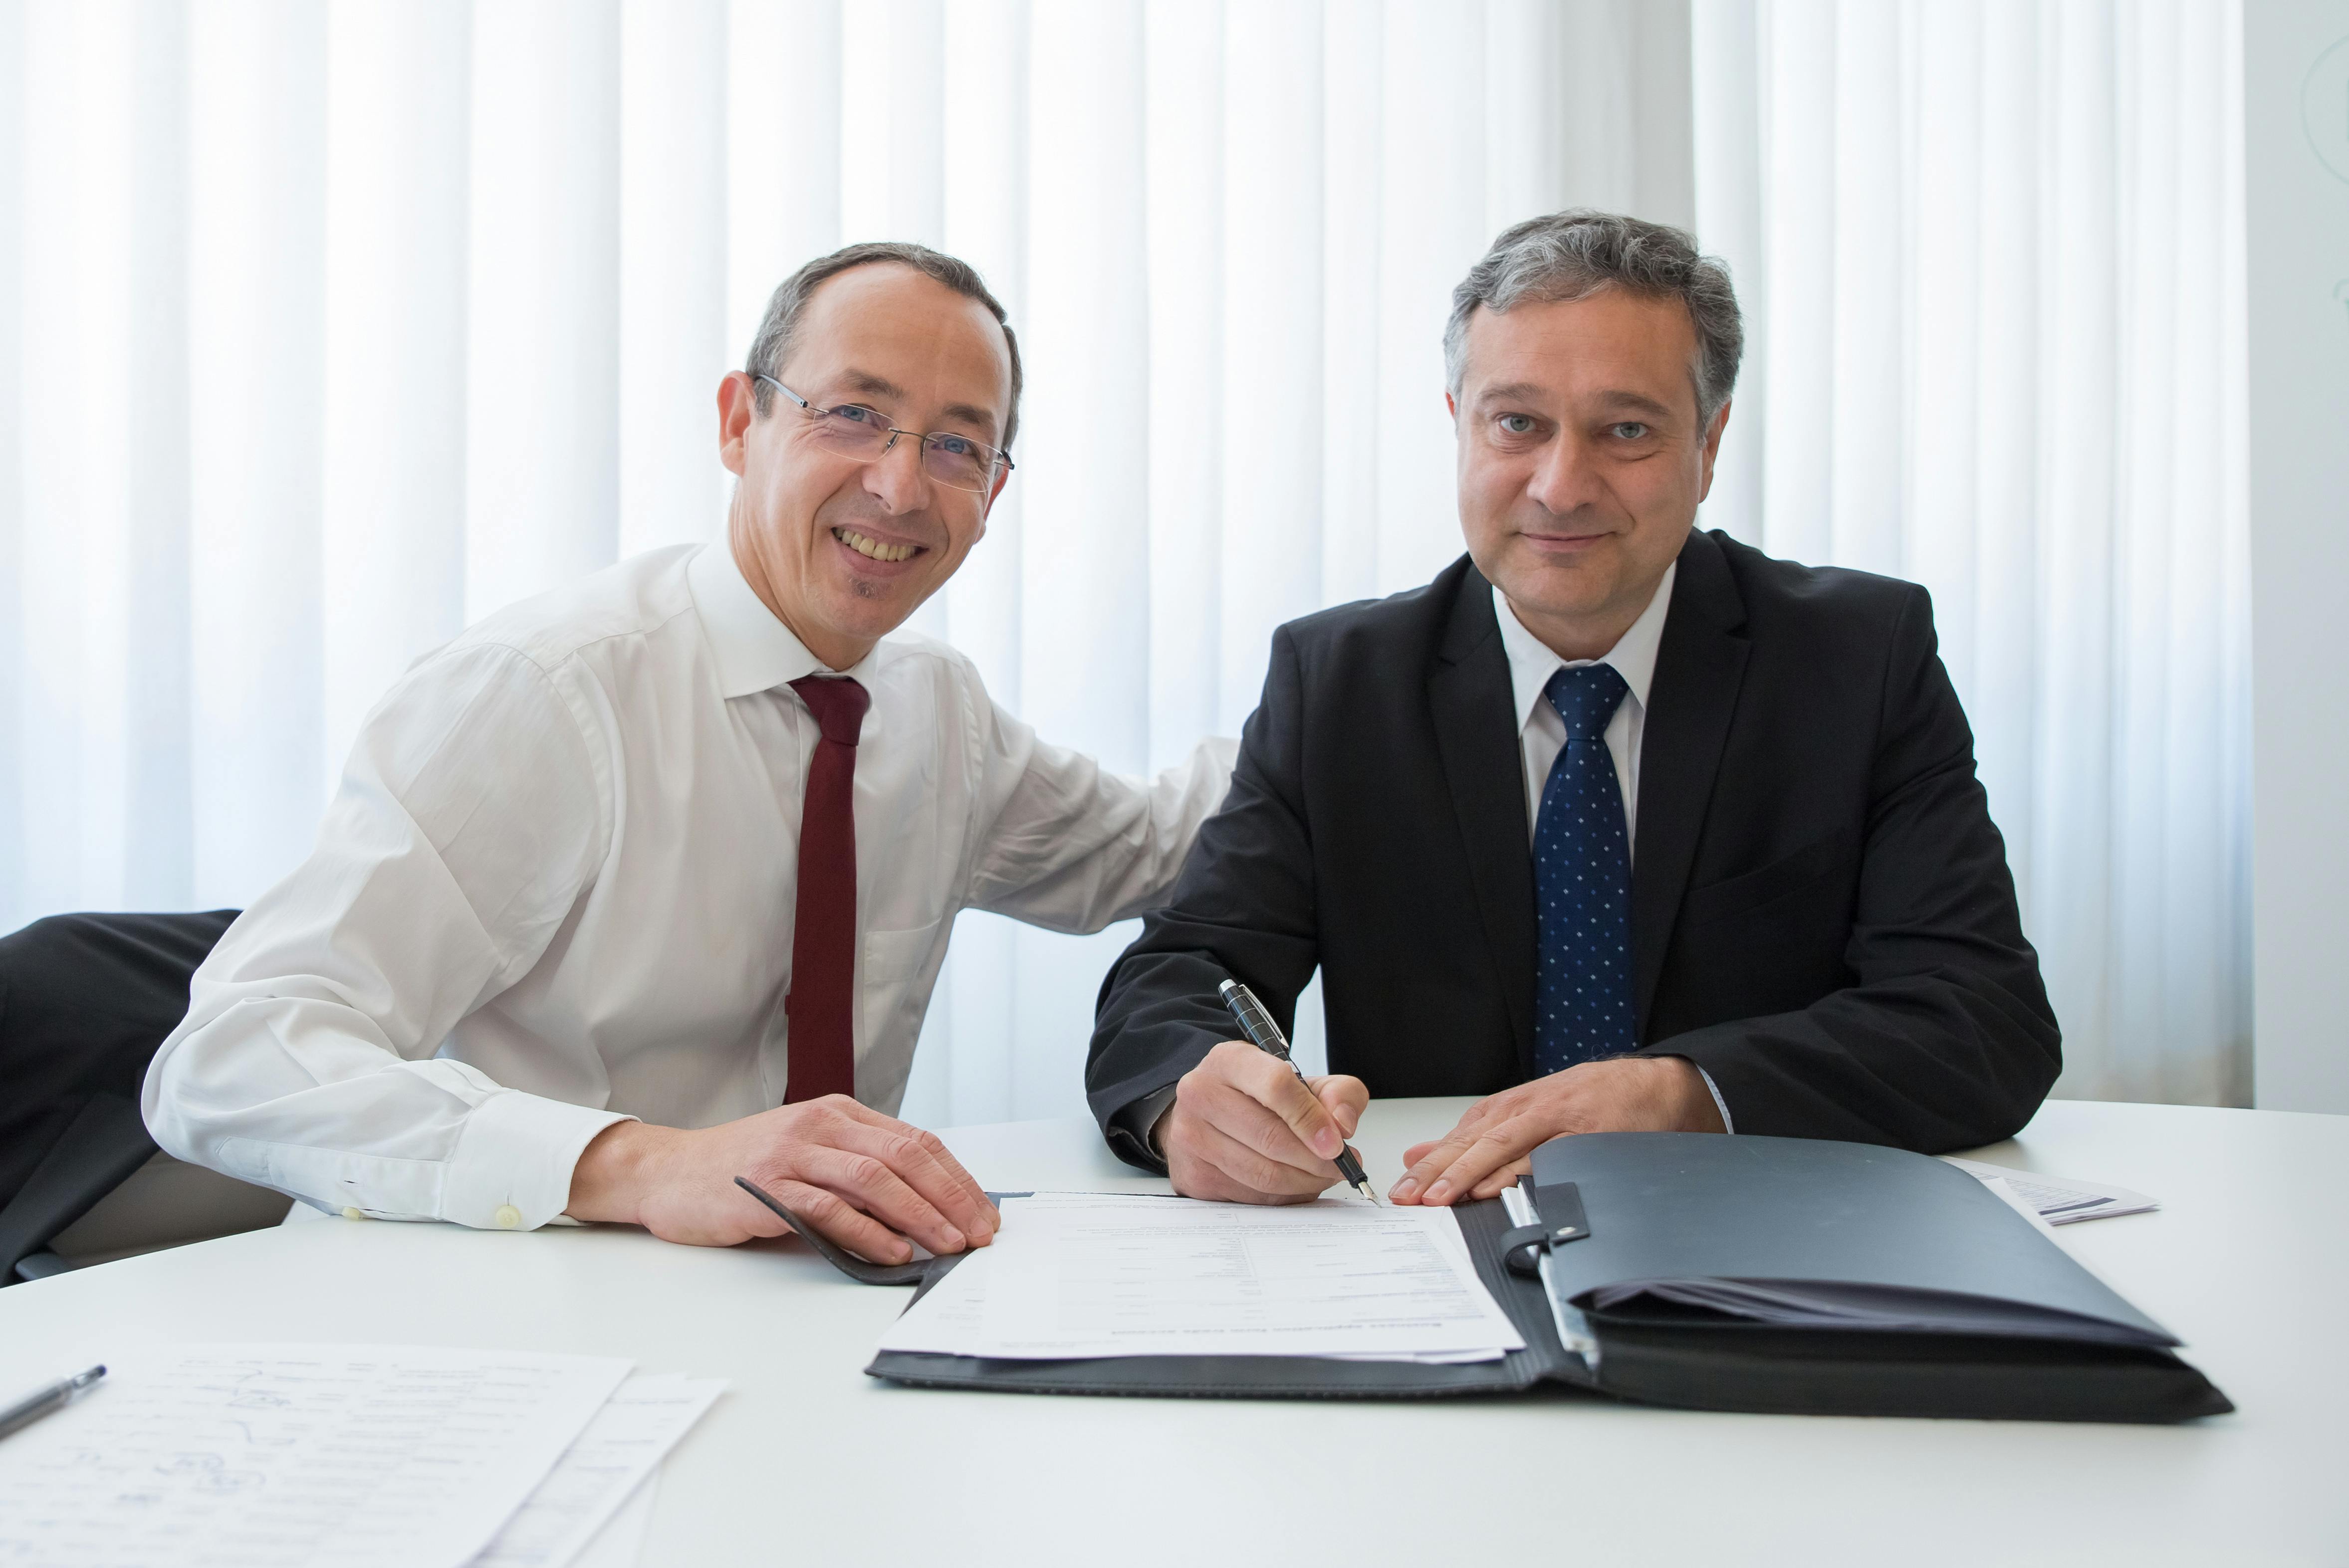 Free A Man in White Long Sleeves Sitting Near the Man in Black Suit Signing Documents Stock Photo